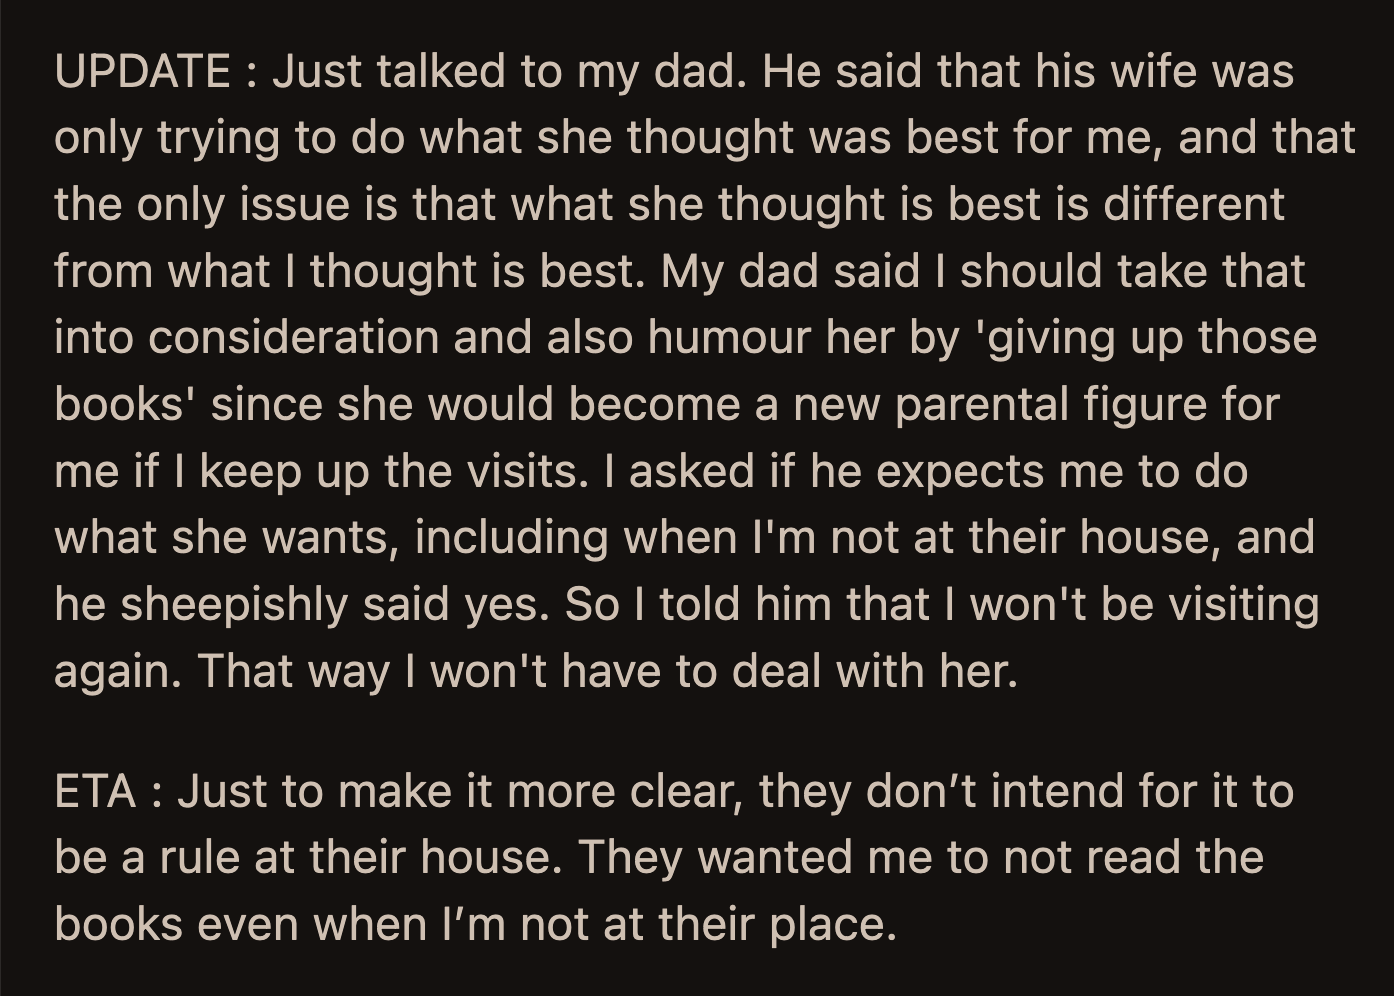 In an update that surprised no one but disappointed everyone, OP's dad doubled down. He chalked it up to a difference in opinion and asked OP to be the bigger person.